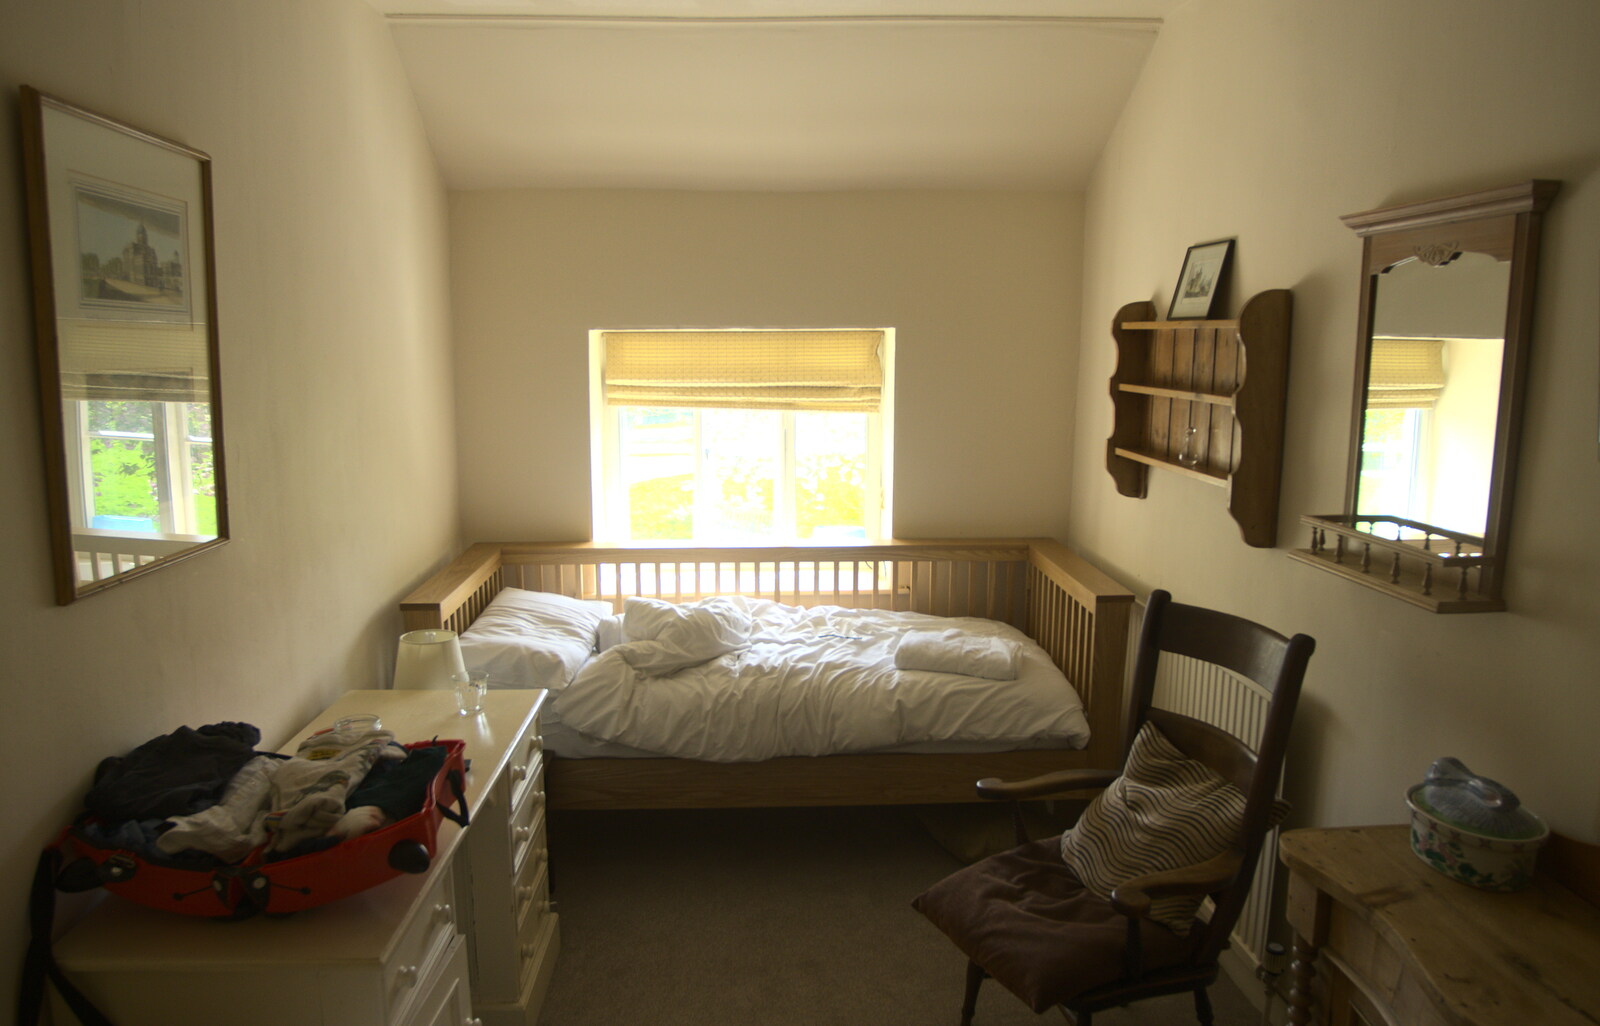 The boys' room from The BSCC Weekend Away, Lyddington, Rutland - 9th May 2015